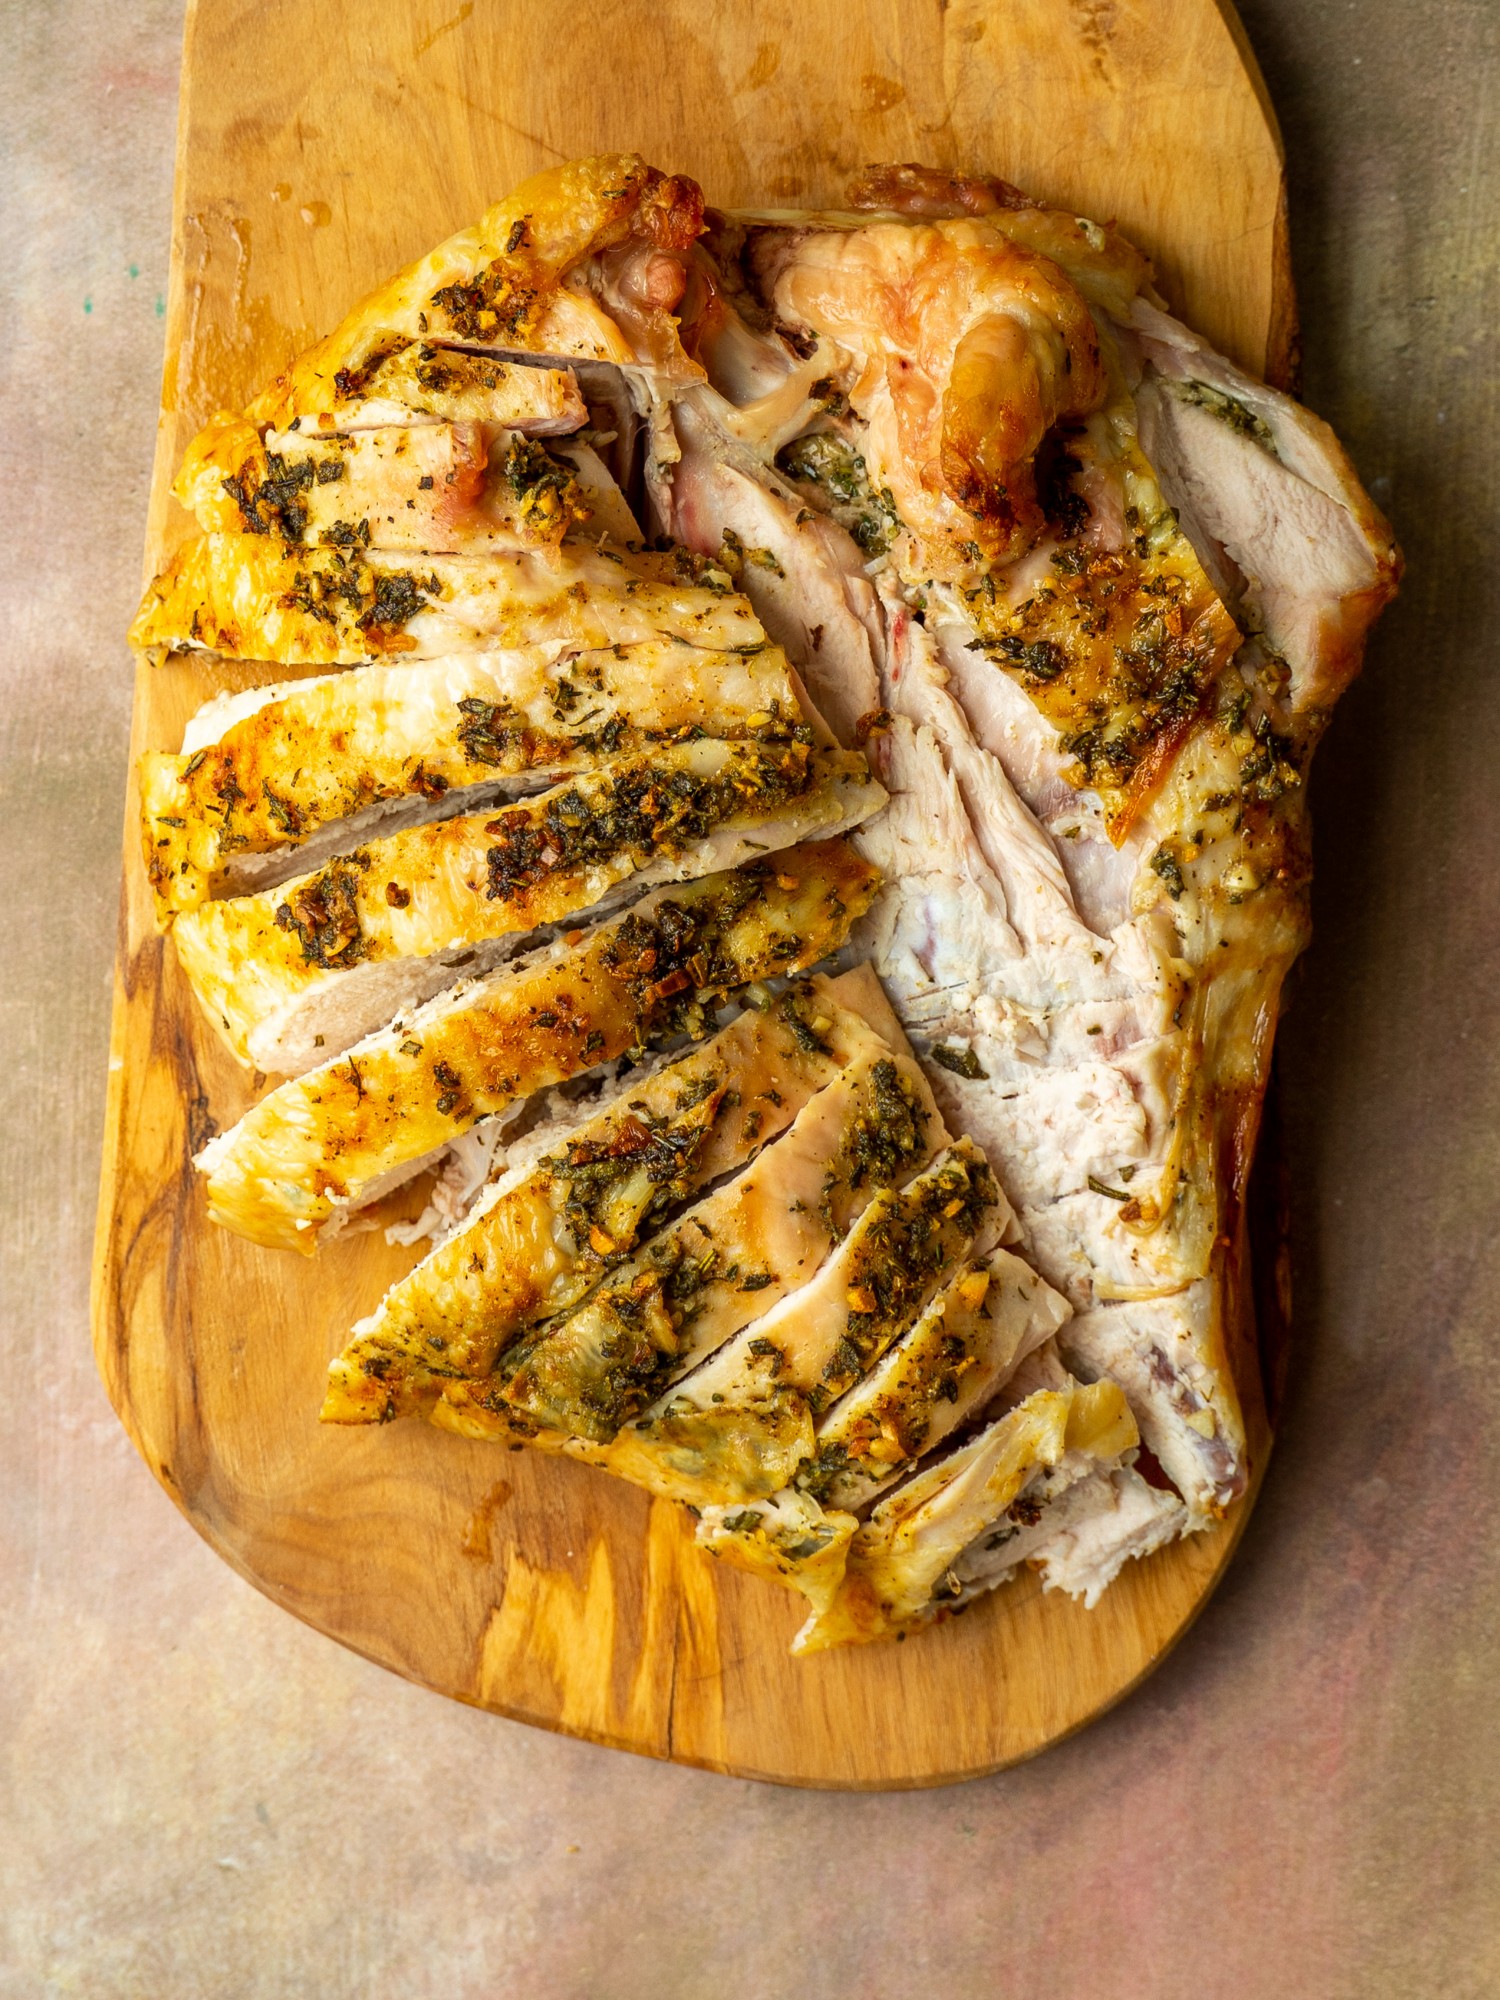 https://madaboutfood.co/wp-content/uploads/2021/10/How-to-Roast-a-Turkey-Breast-06.jpg